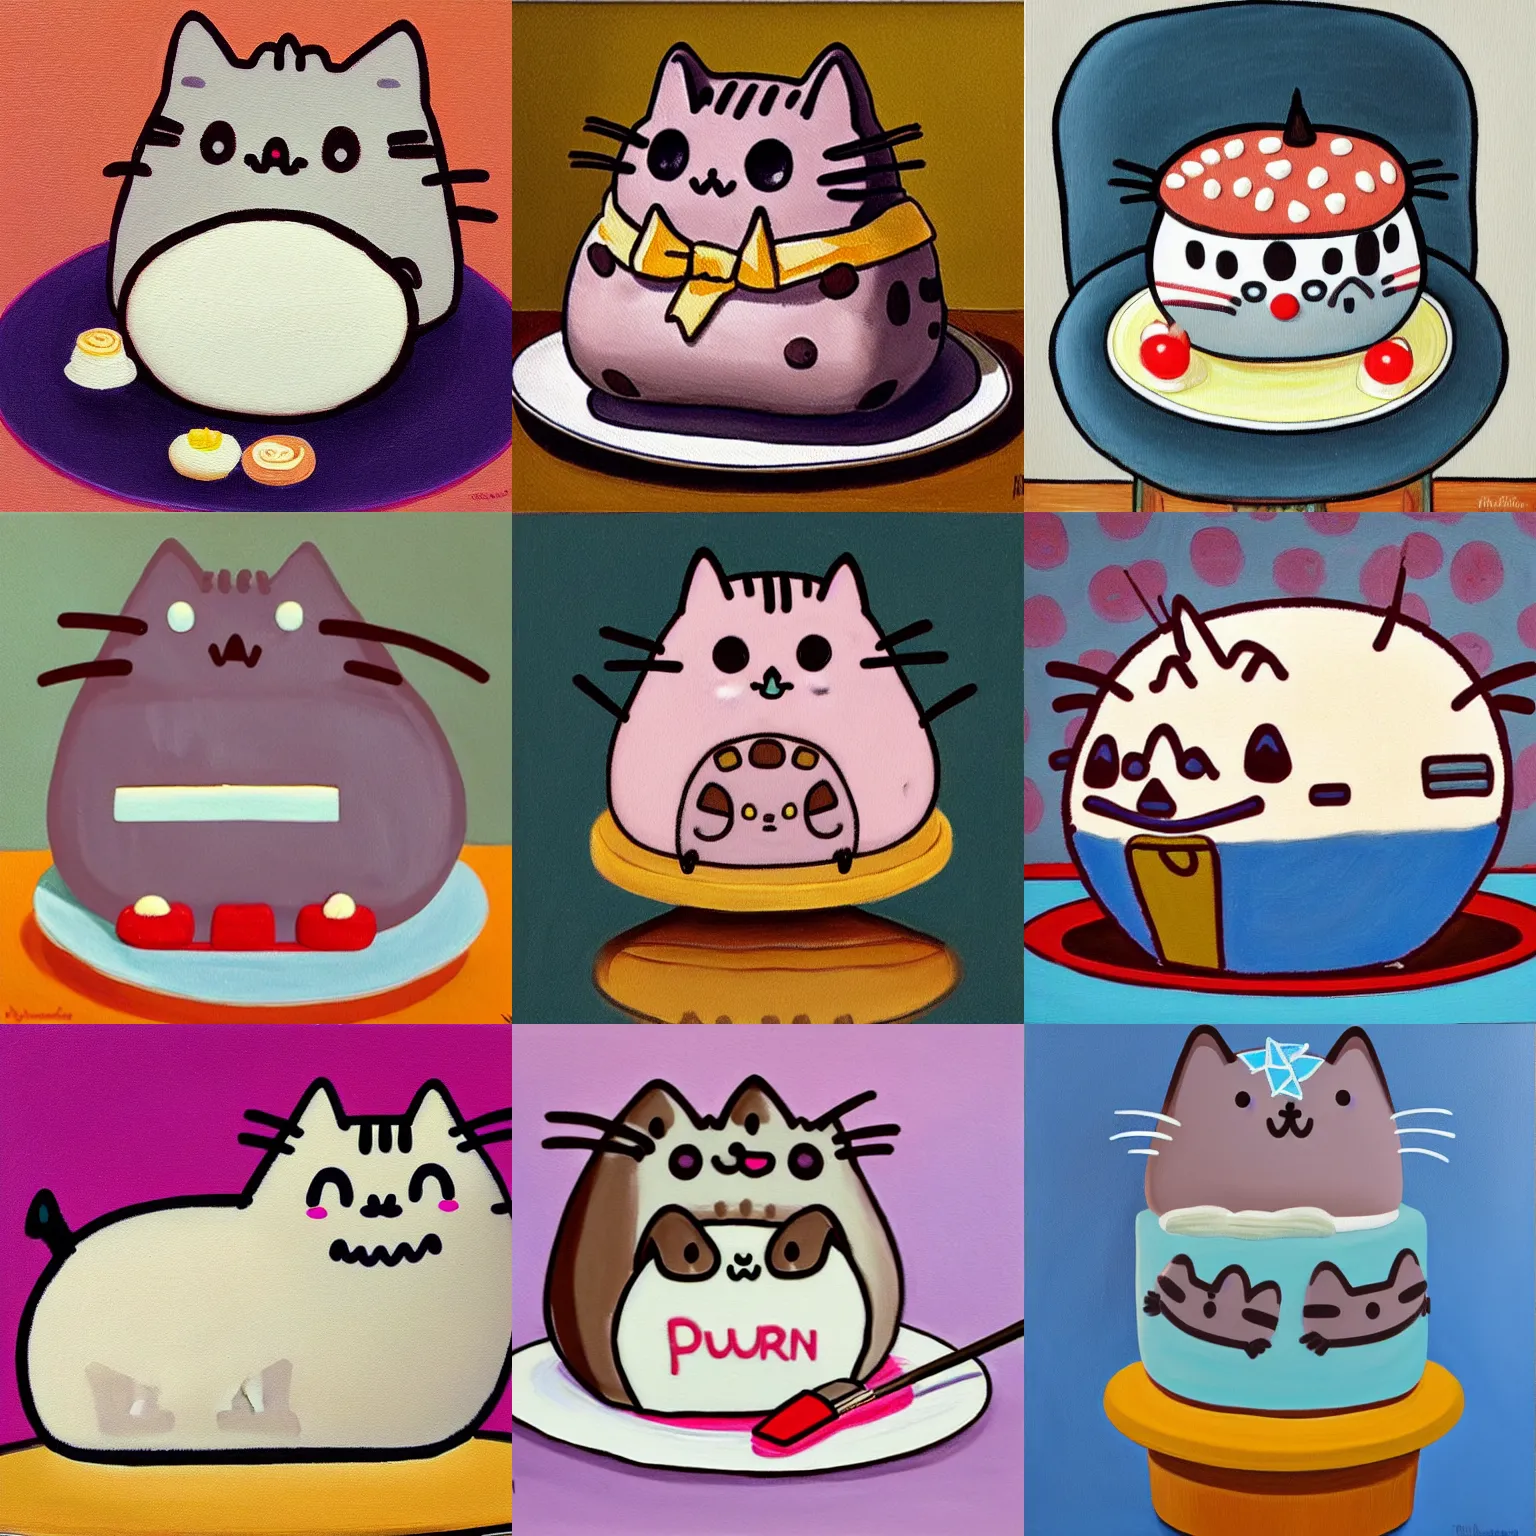 Prompt: A painting of a pusheen cake by Wayne Thiebaud